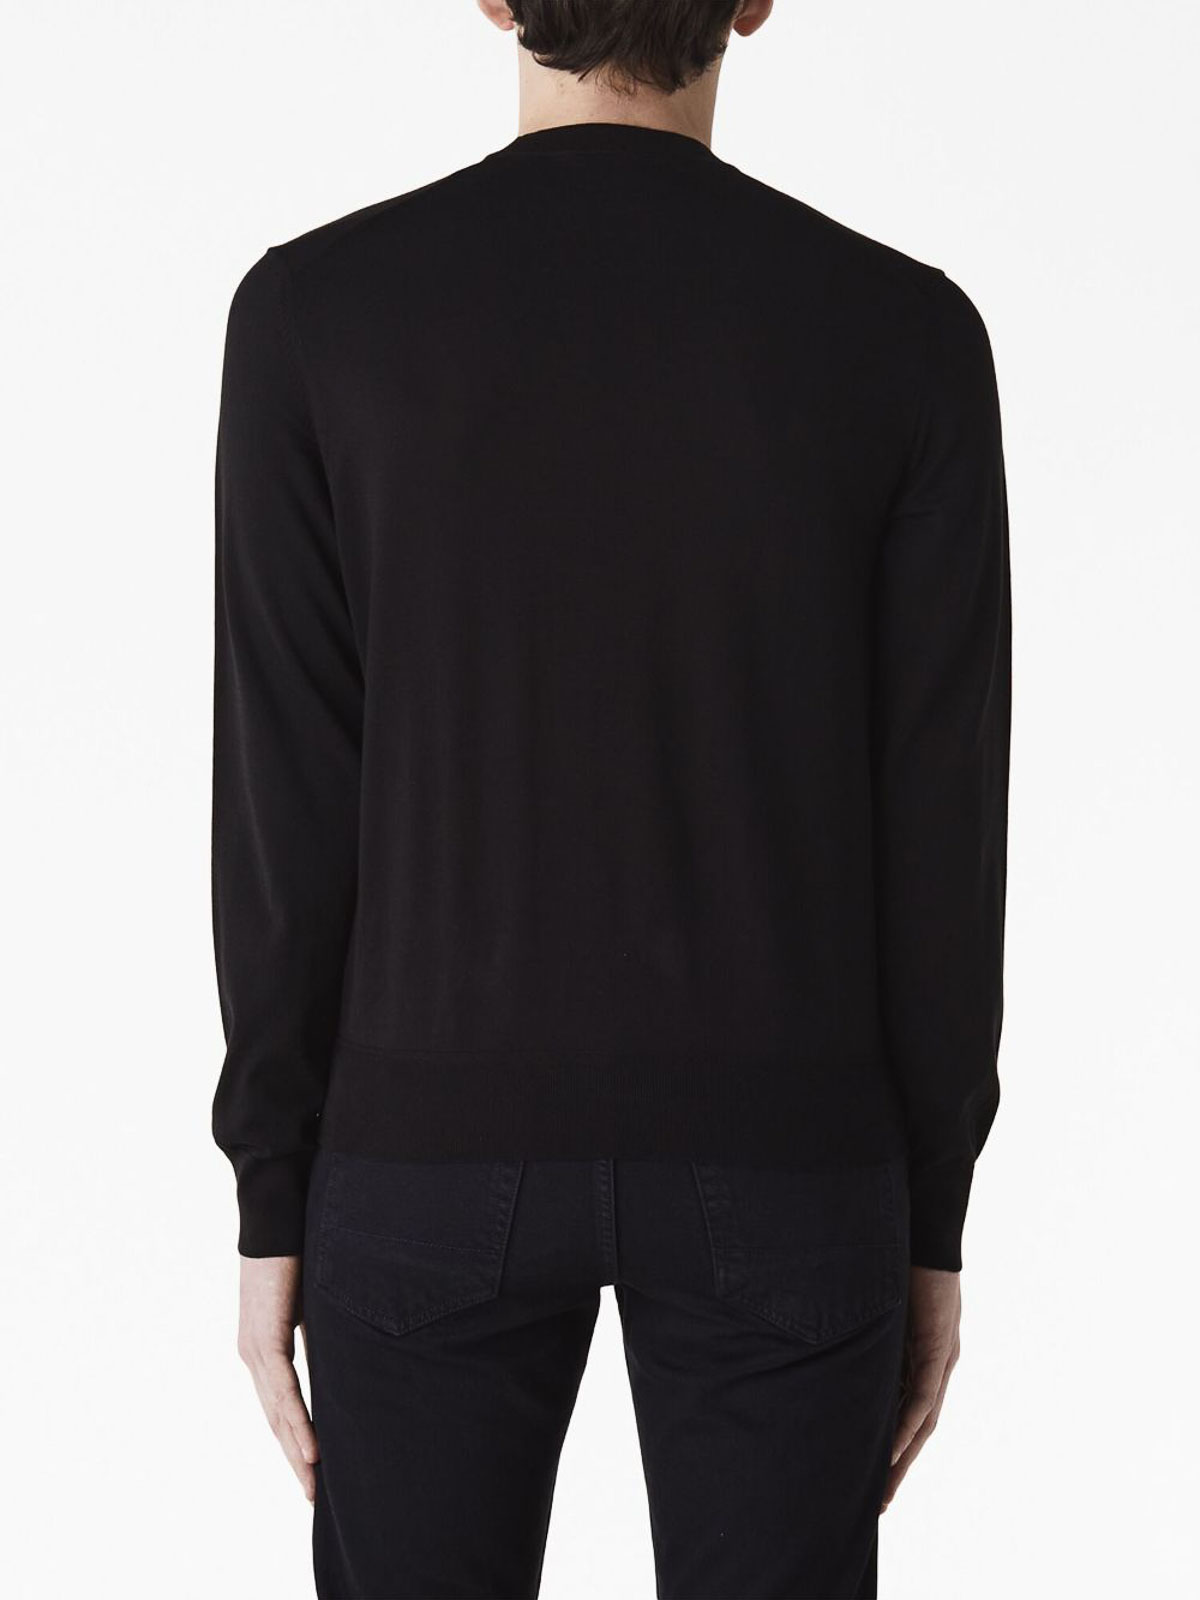 Shop Tom Ford Crew Neck Sweater In Black